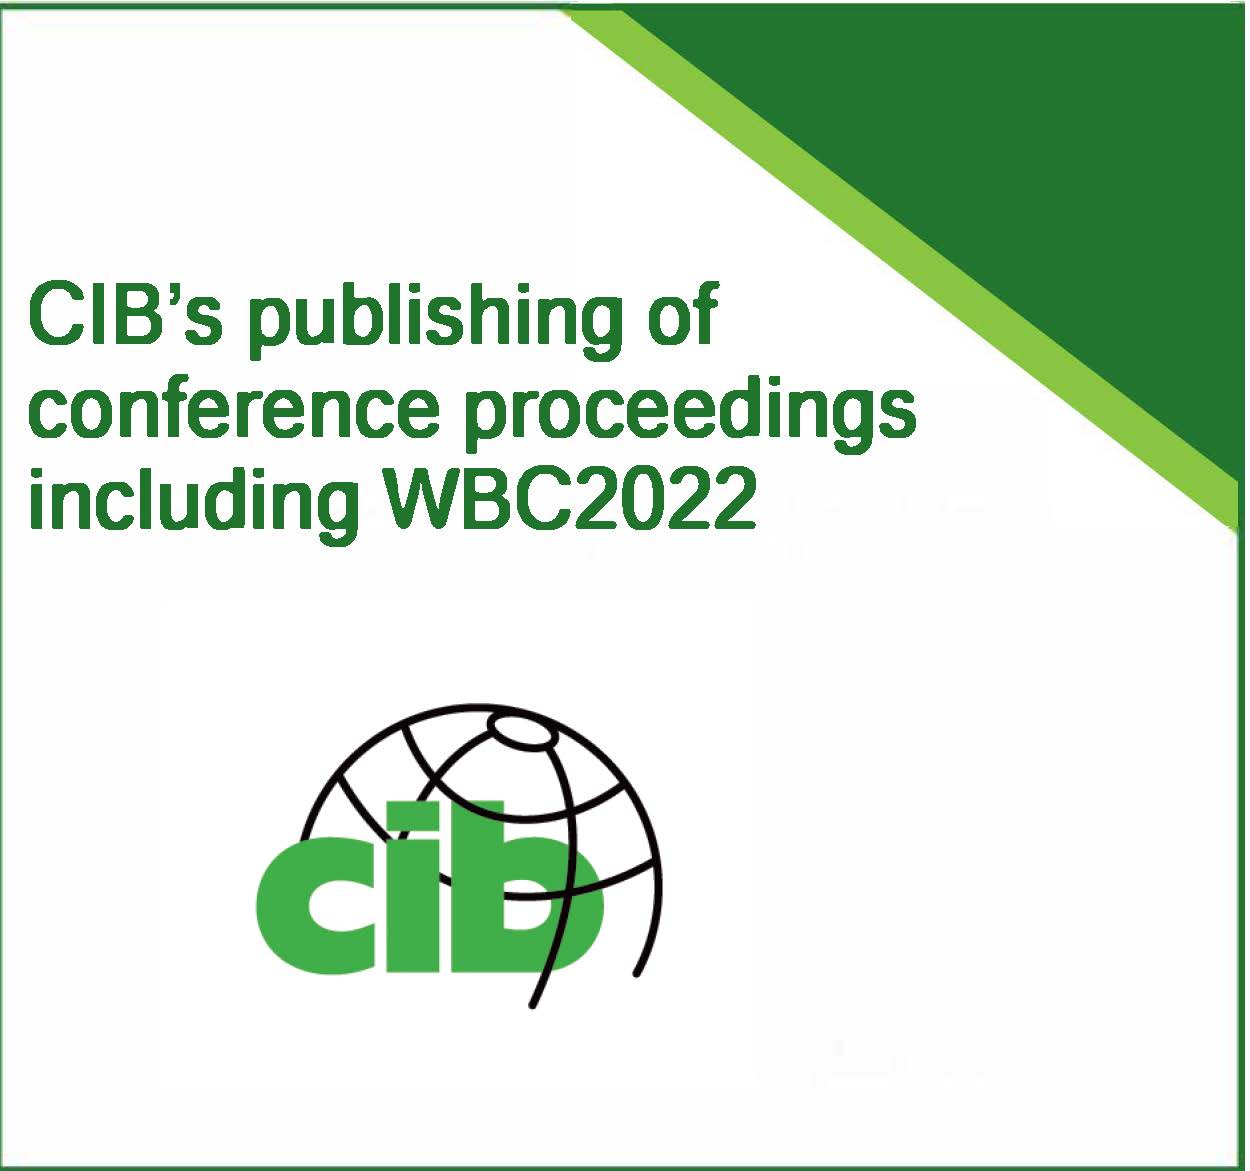 About CIB’s publishing of conference proceedings including WBC2022